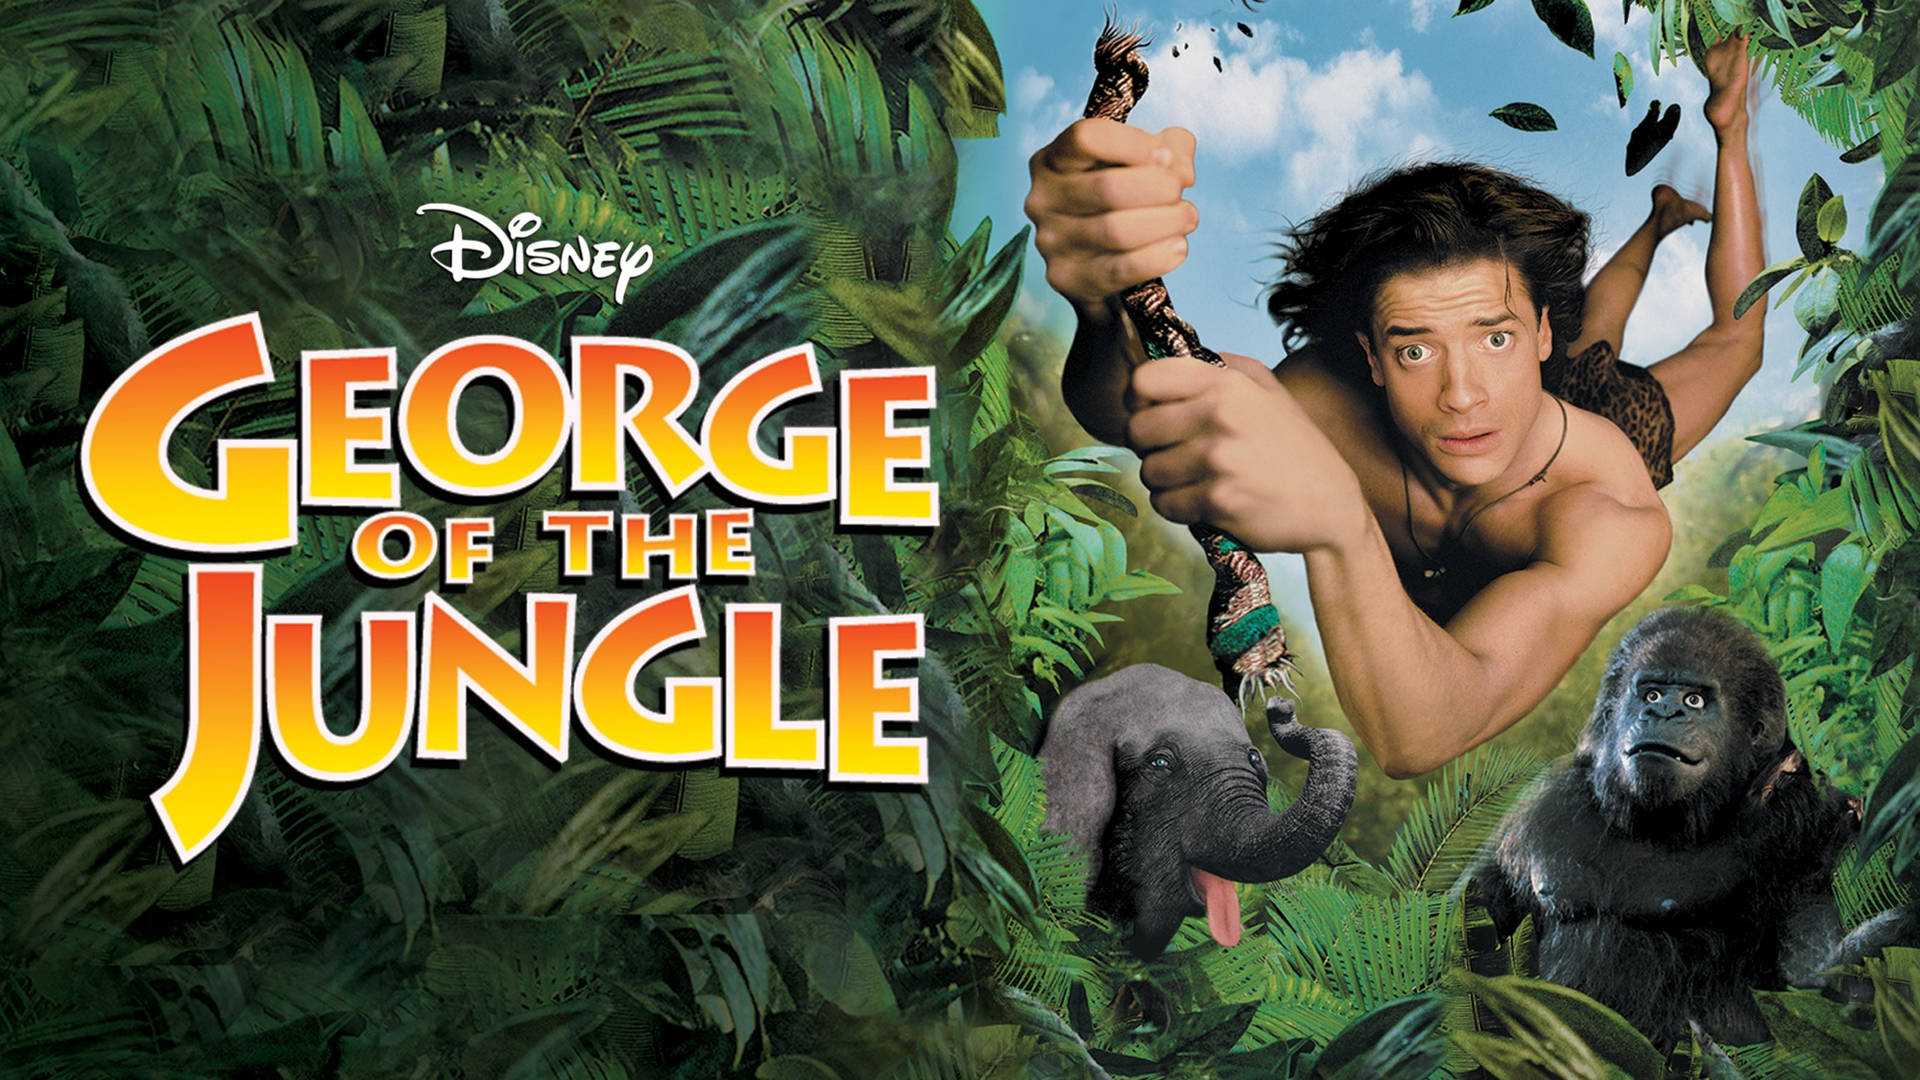 Top 999+ George Of The Jungle Wallpaper Full HD, 4K Free to Use